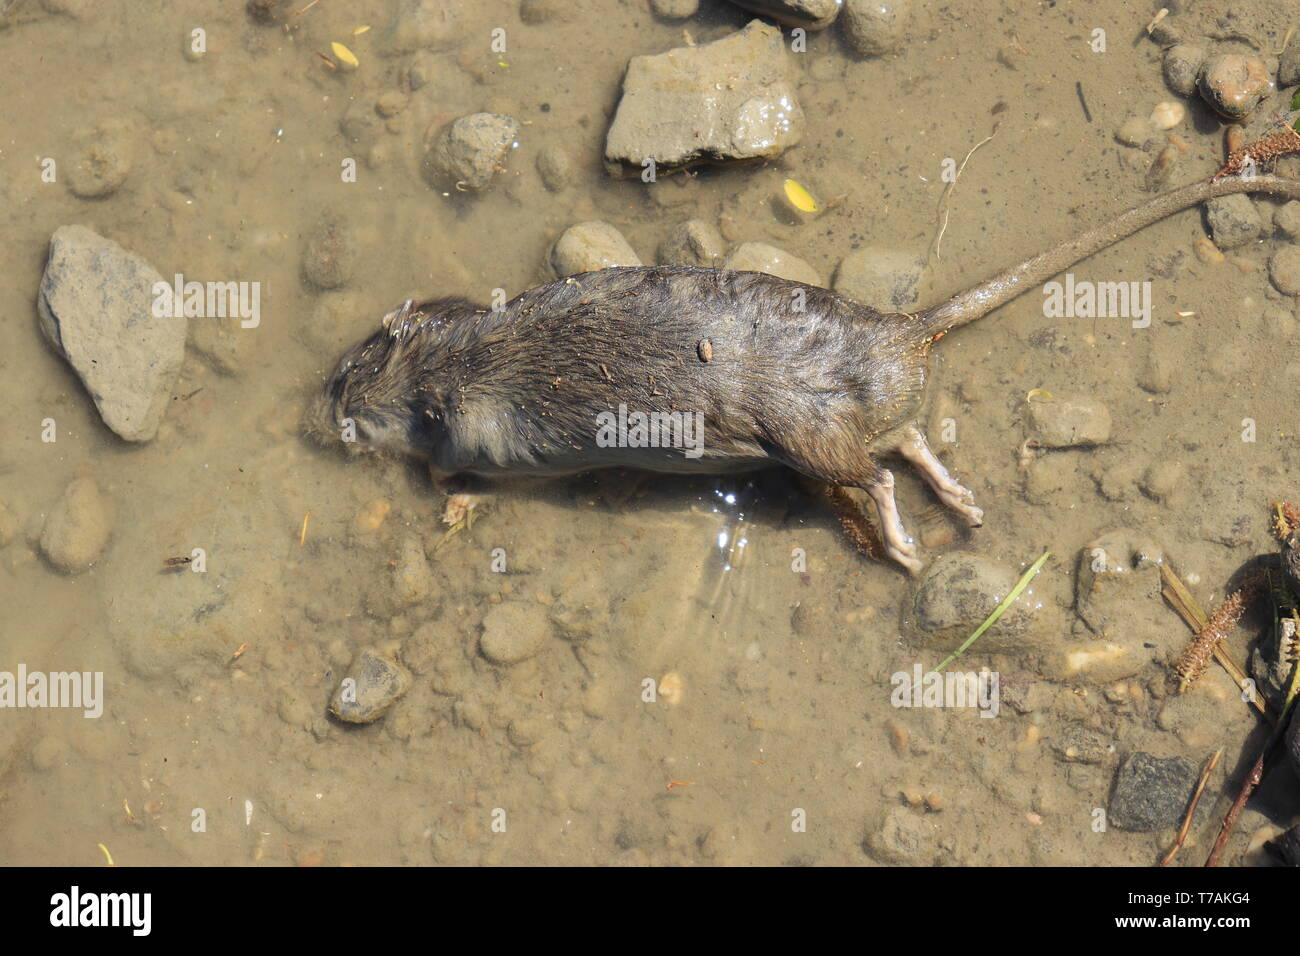 Dead rat lies on the river bank close up Stock Photo